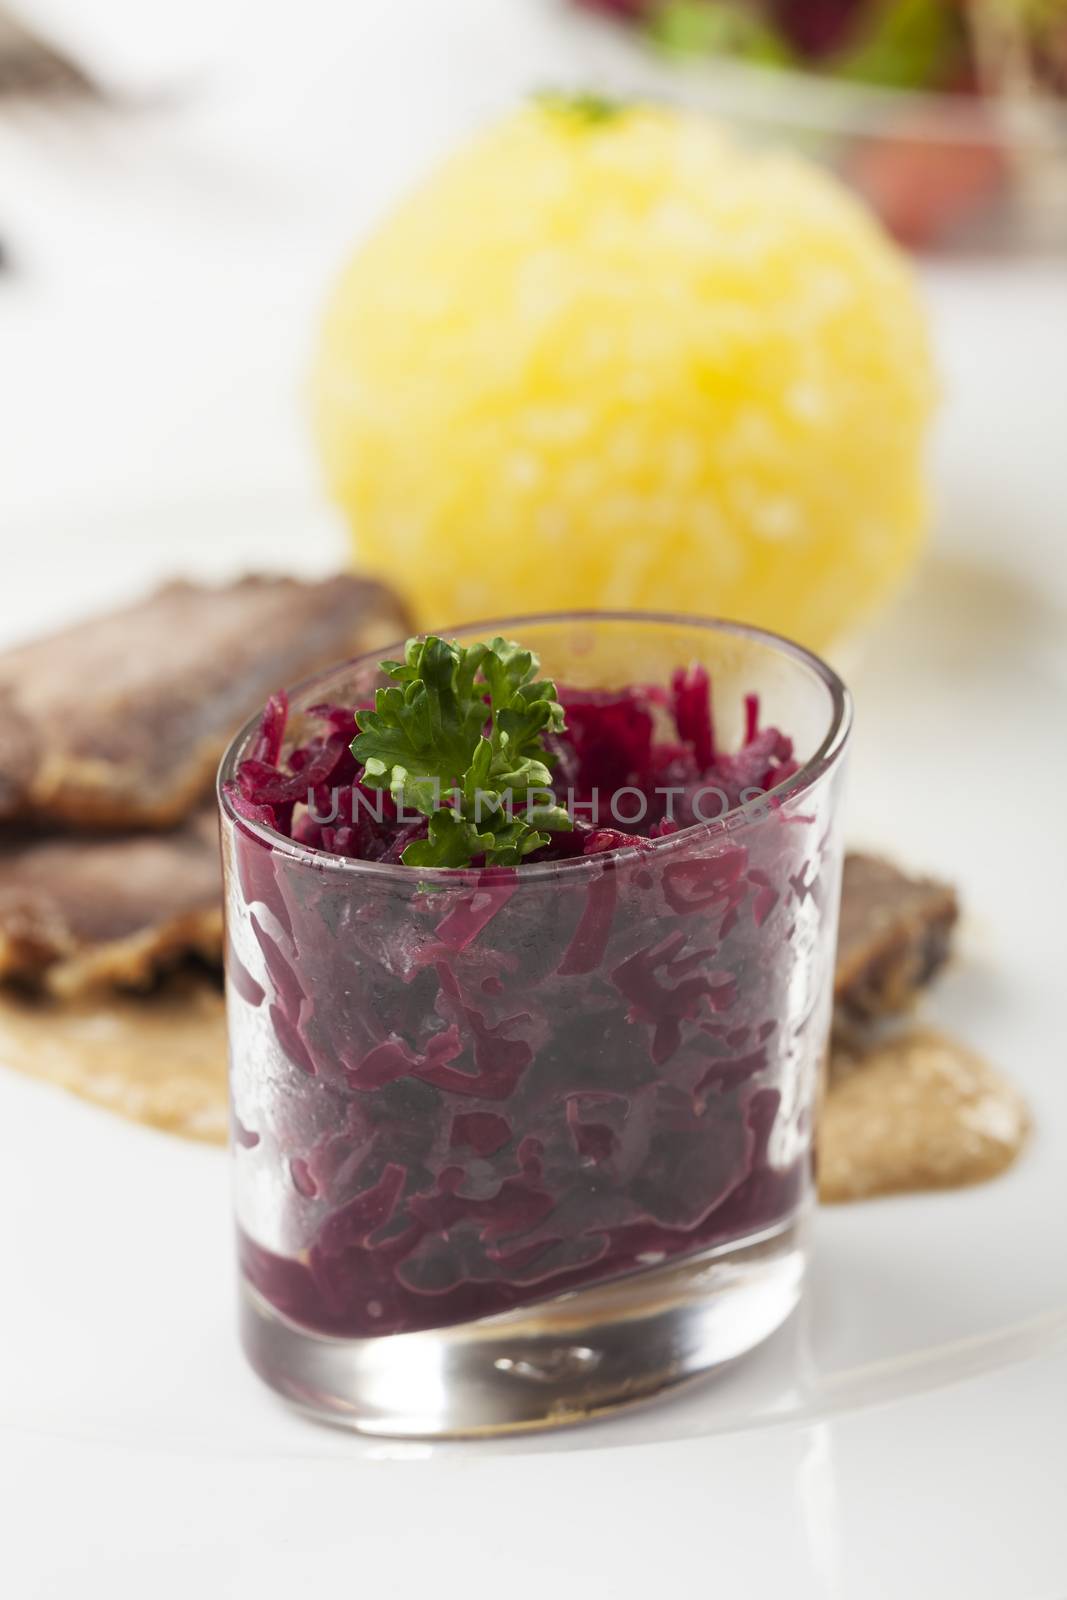 red cabbage and german sauerbraten by bernjuer